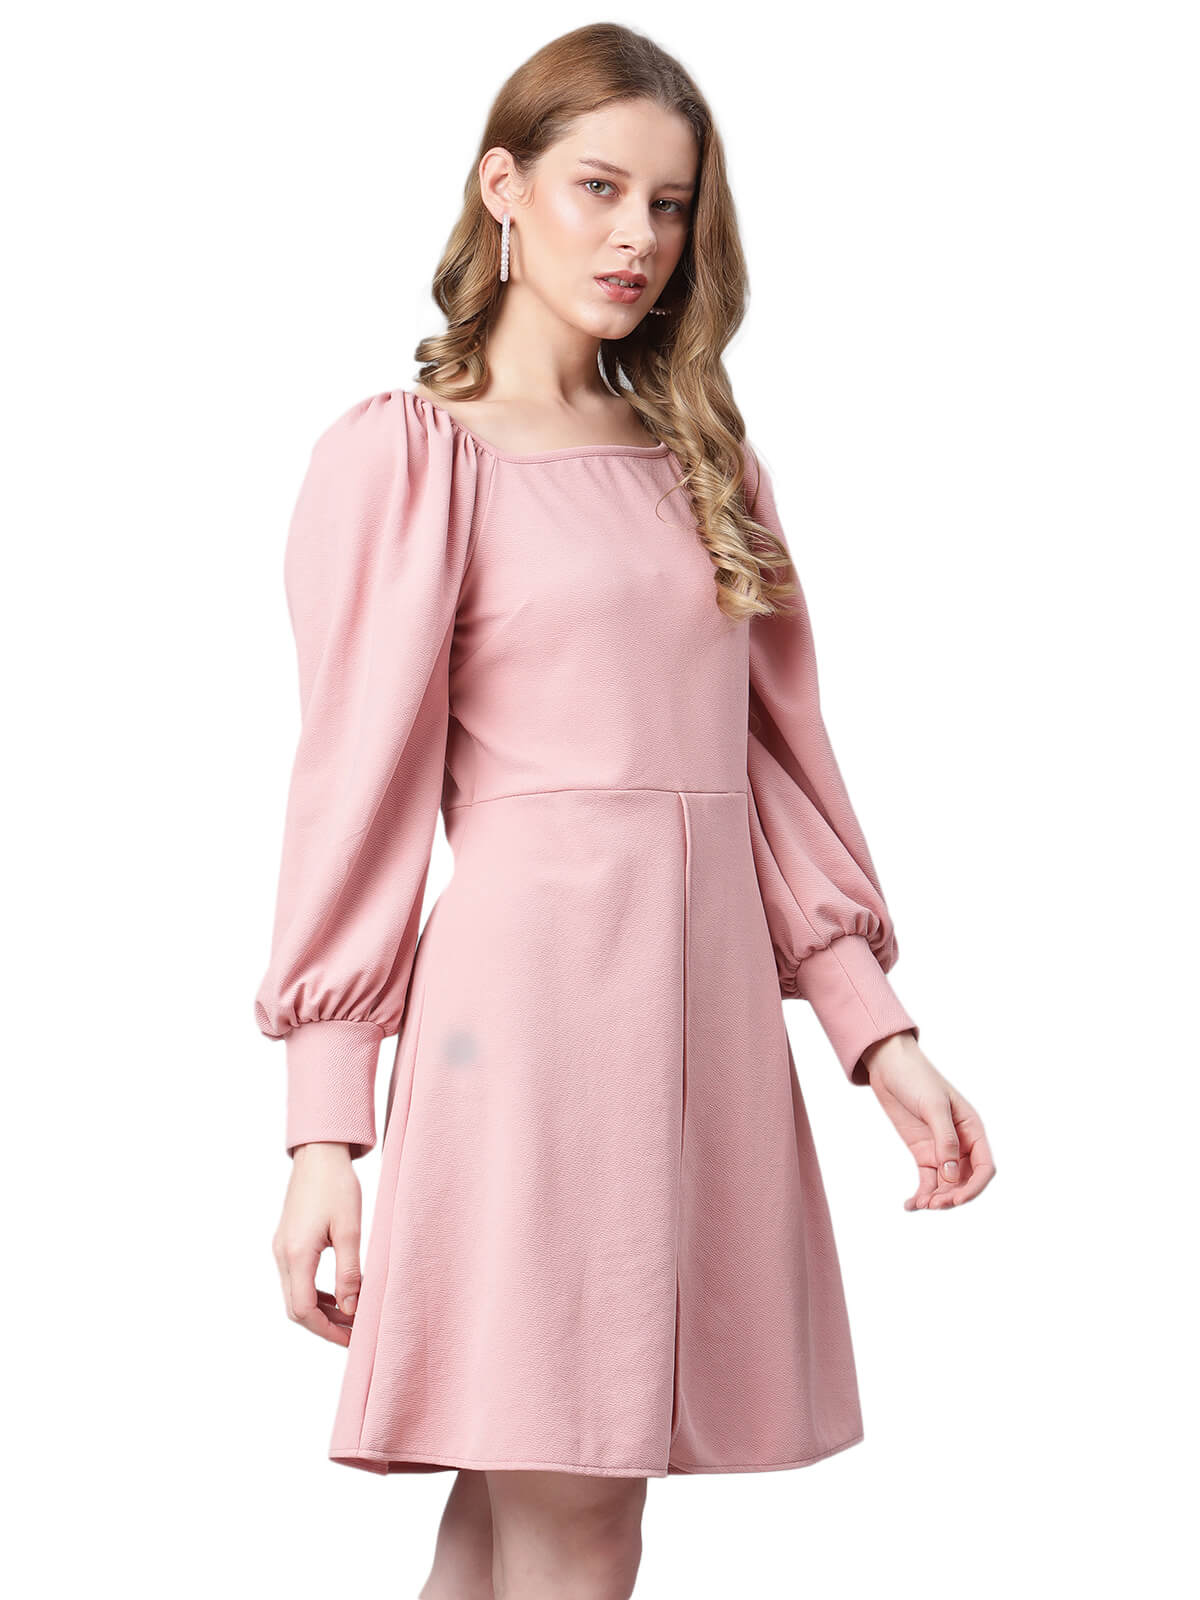 Msfq Womens A-Line Dress Mutton Leg Sleeve With Side Slit